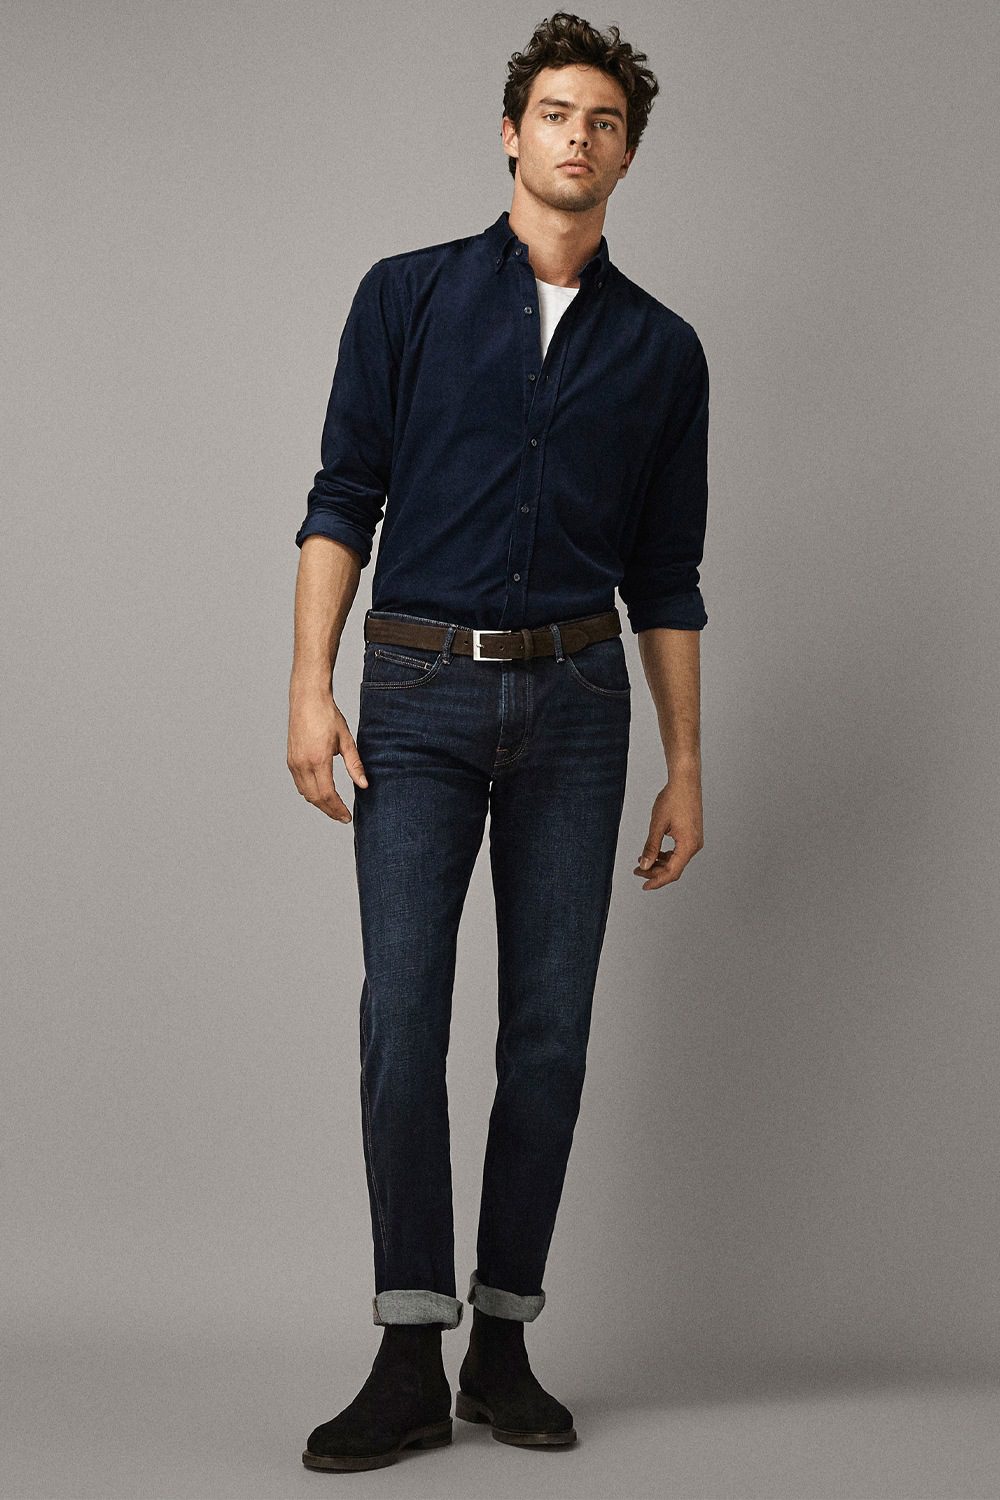 How to Wear Boots for Men  Personal Styling  Stitch Fix